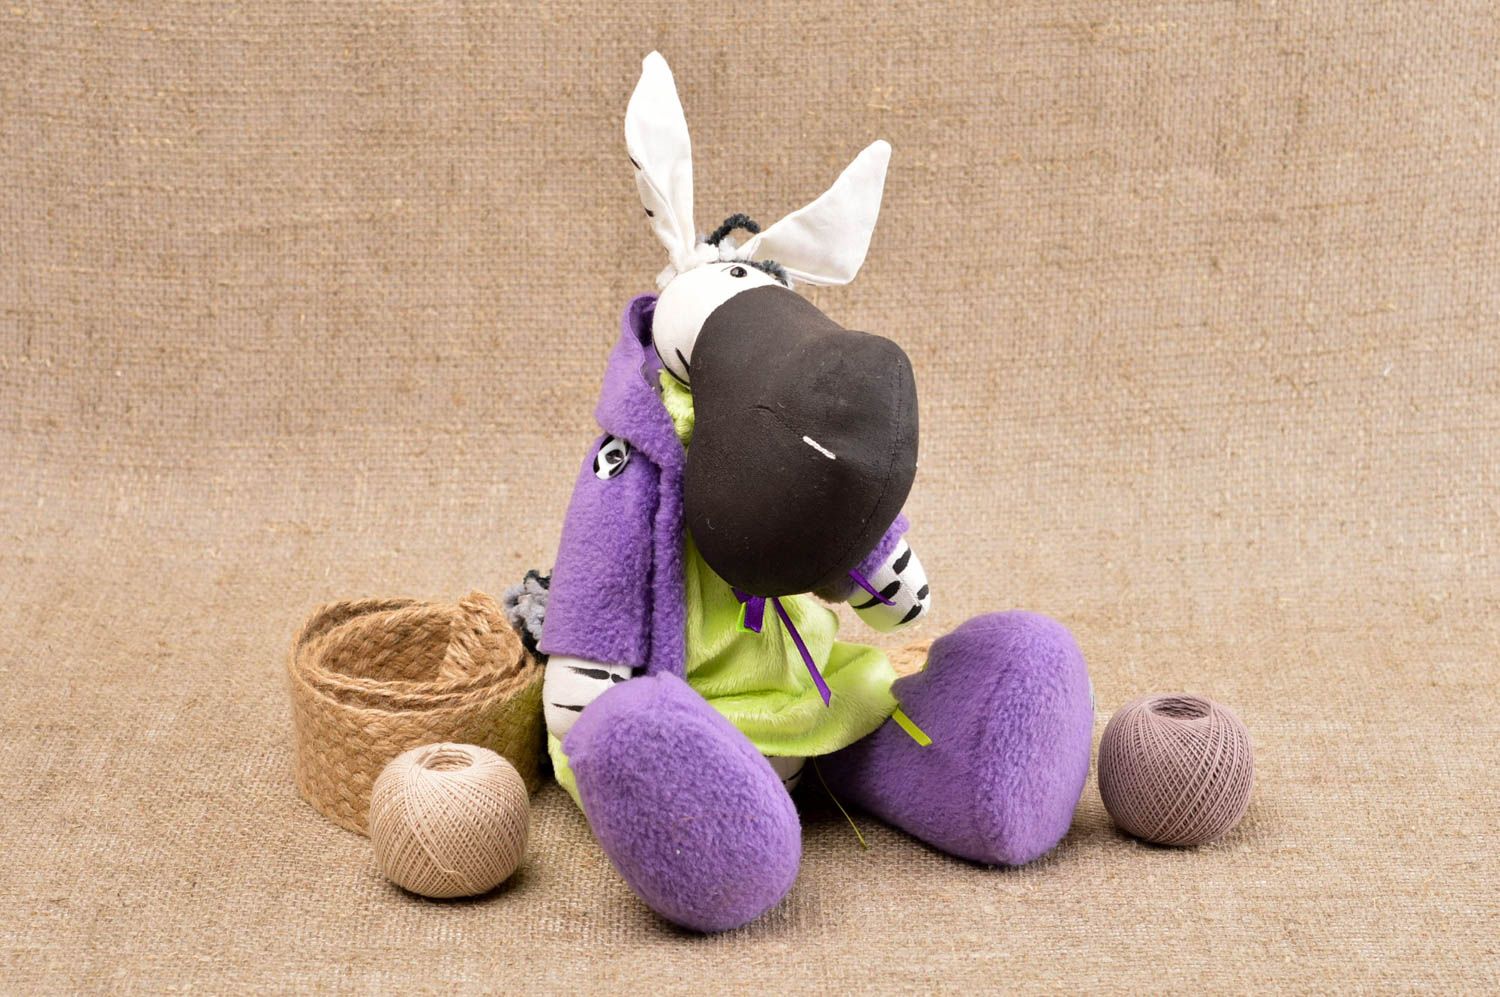 Handmade fabric soft toy stuffed toy for kids childrens toys room decor ideas photo 1